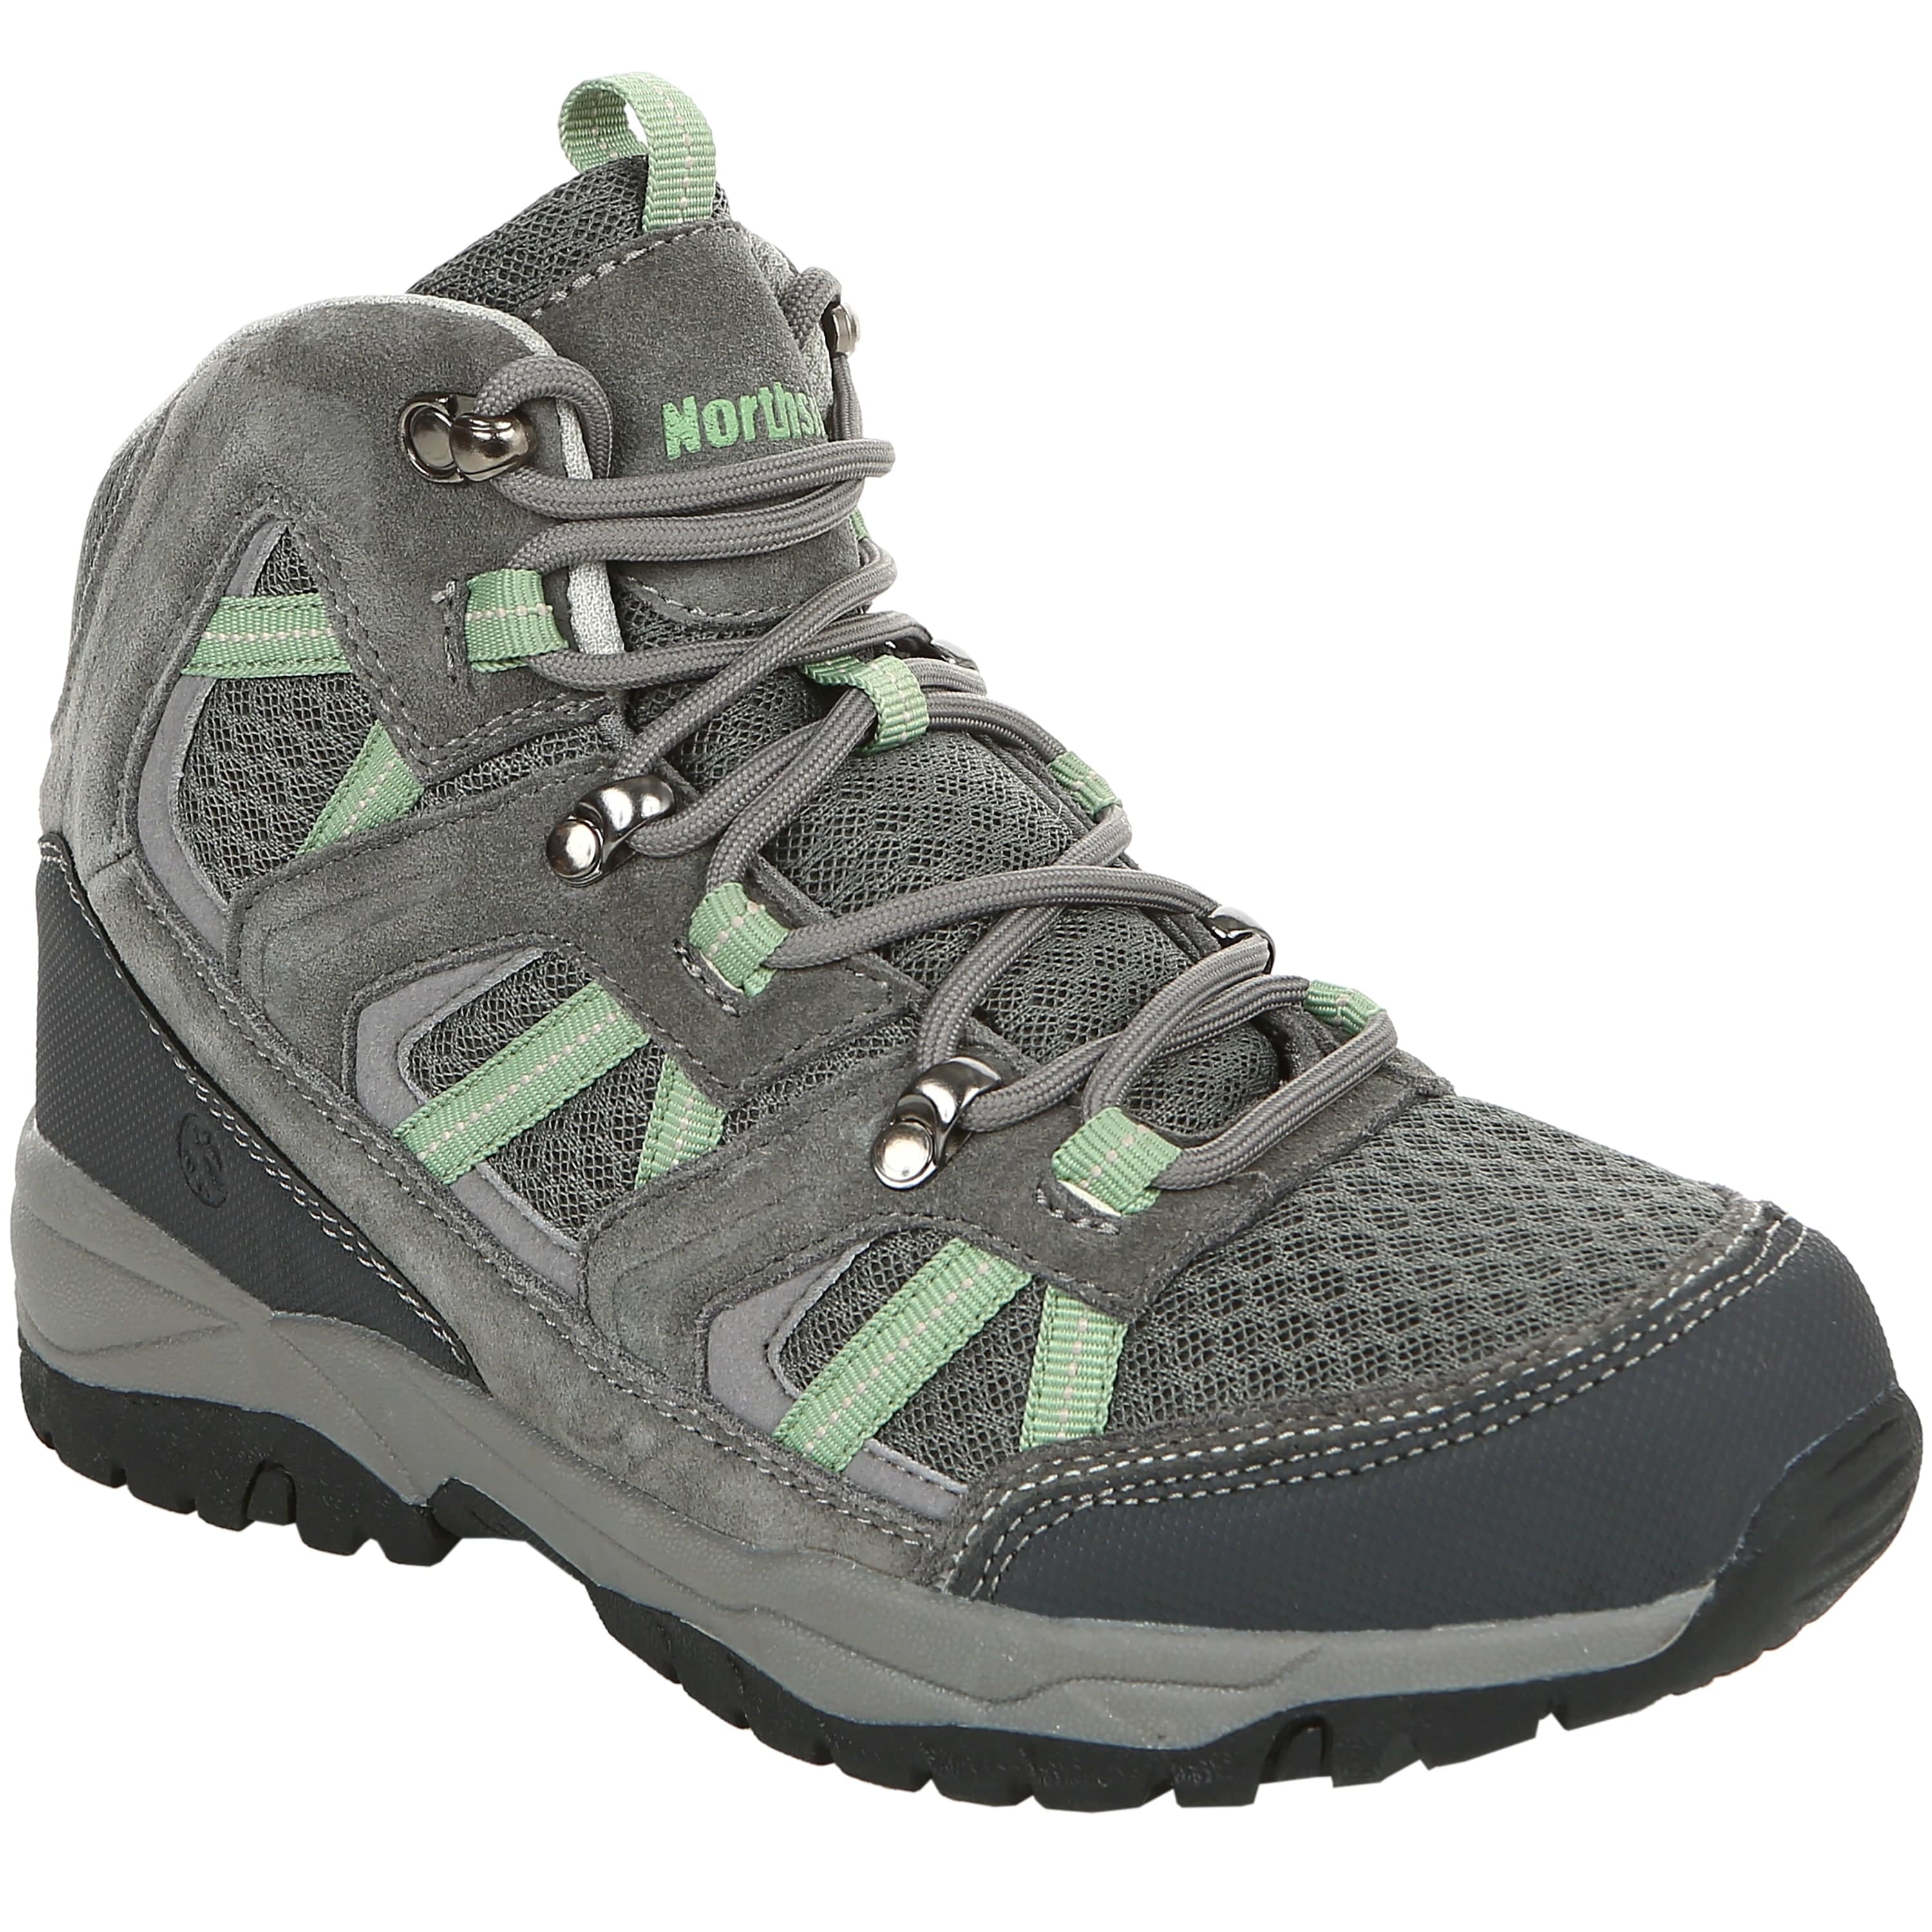 Women's Arlow Canyon Mid Hiking Boot - Northside USA